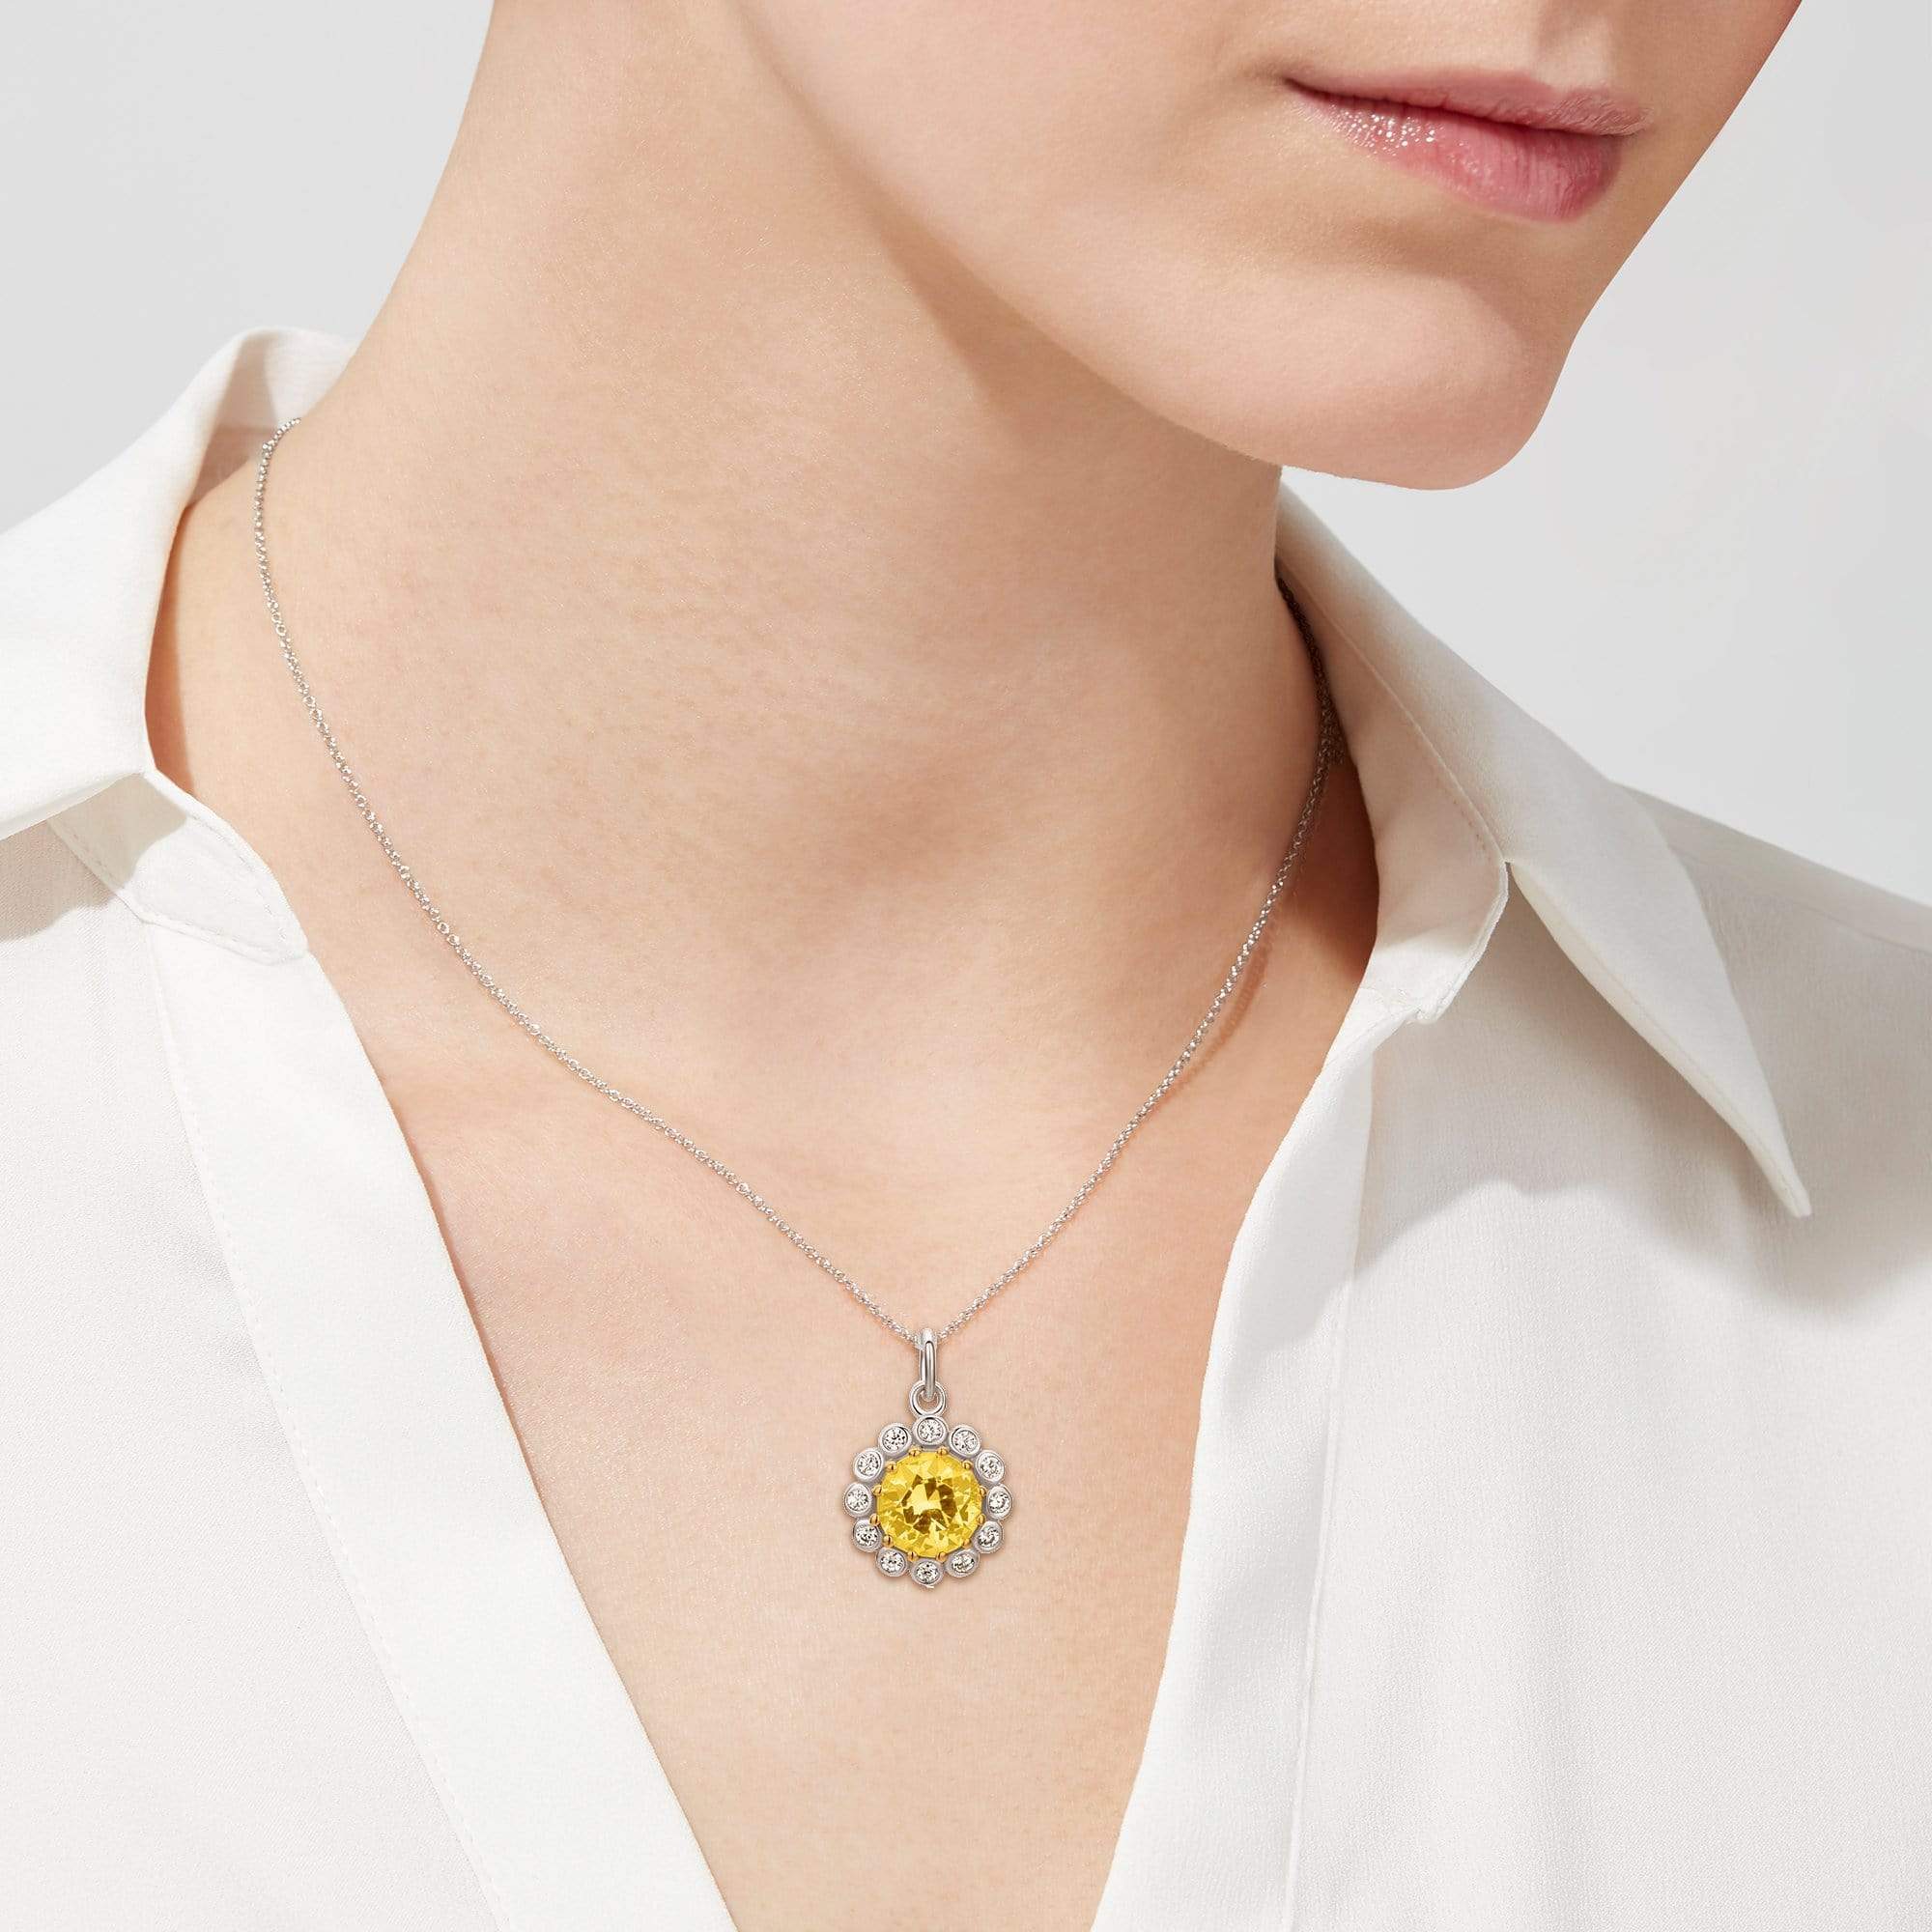 Lynora Jewellery Necklace 18" / Sterling Silver / Citrine Giallo Round Necklace Sterling Silver